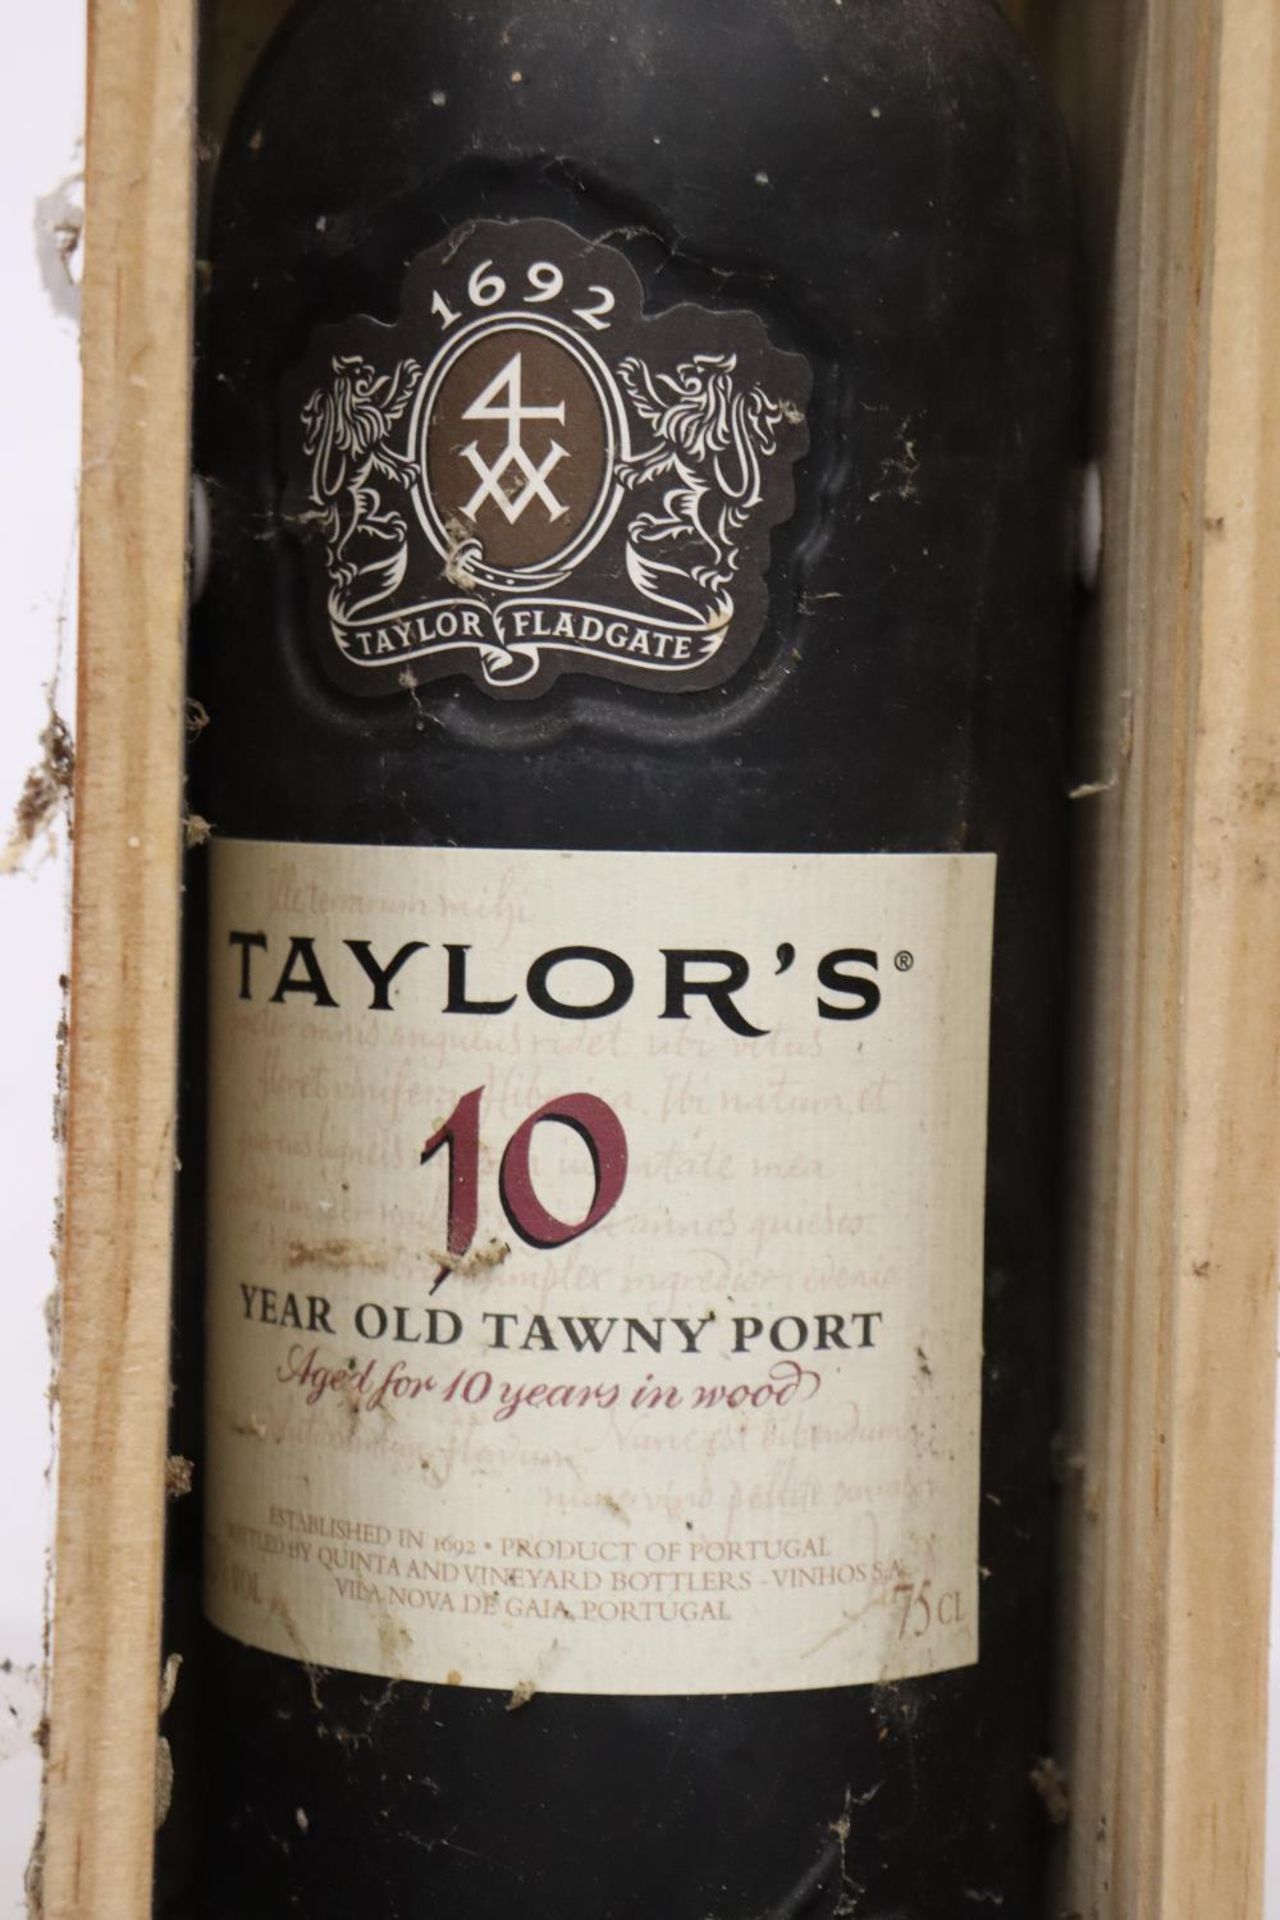 A BOTTLE OF TAYLOR'S 10 YEAR TAWNEY PORT IN WOODEN PRESENTATION BOX - Image 2 of 3